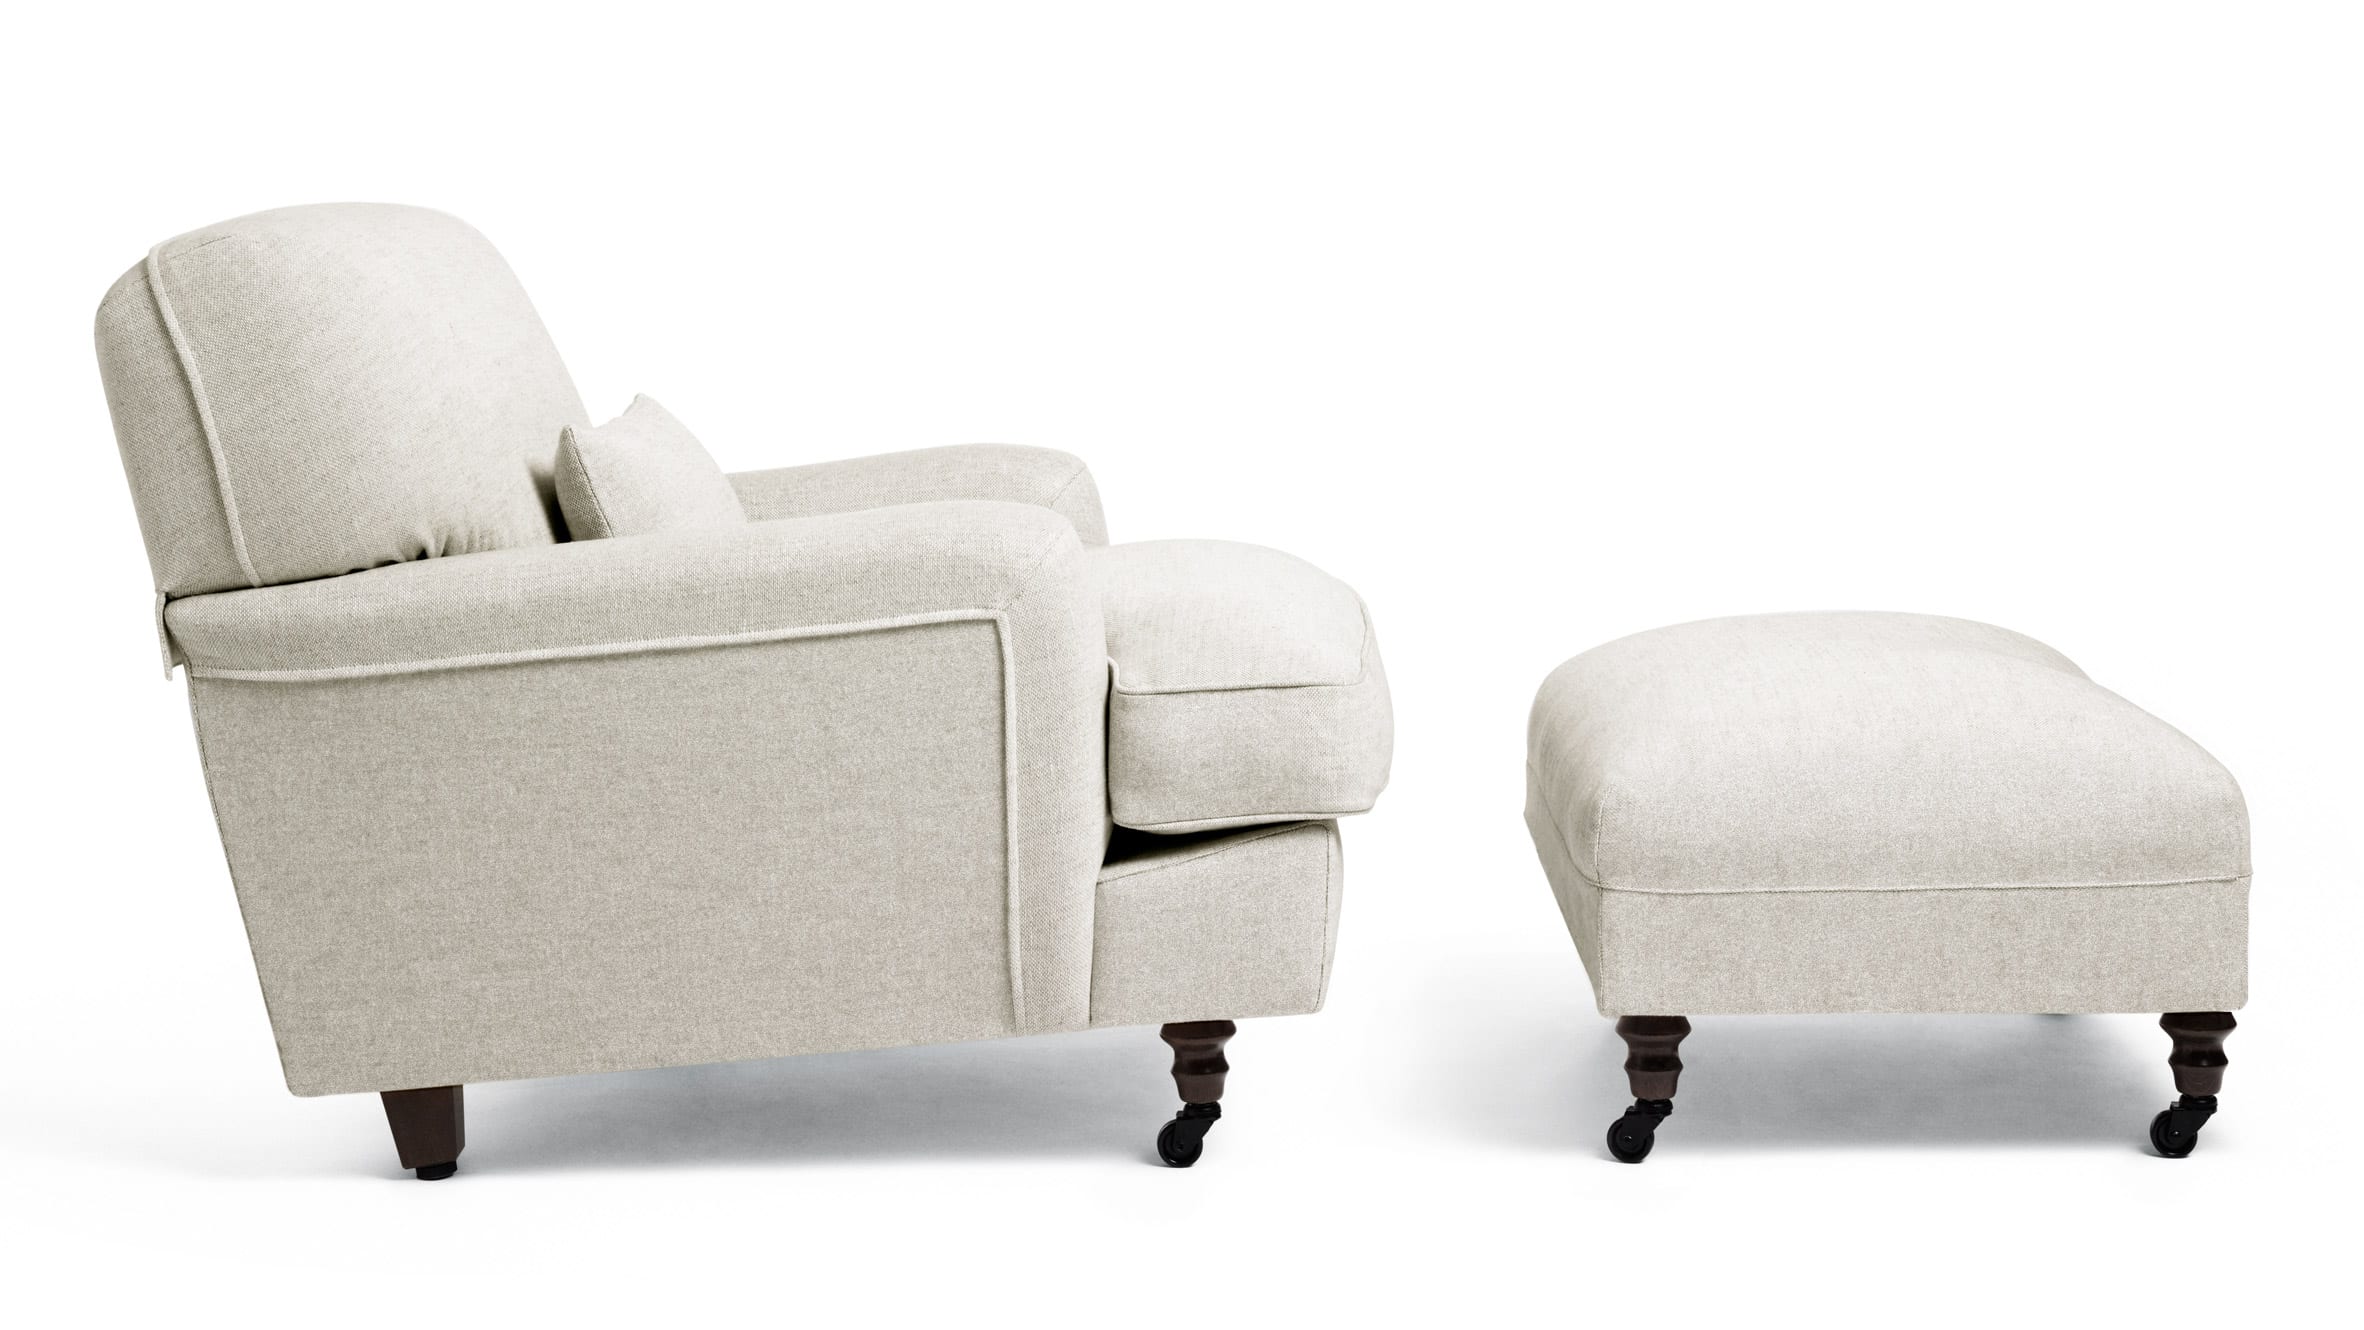 Raffles armchair and pouf in cream